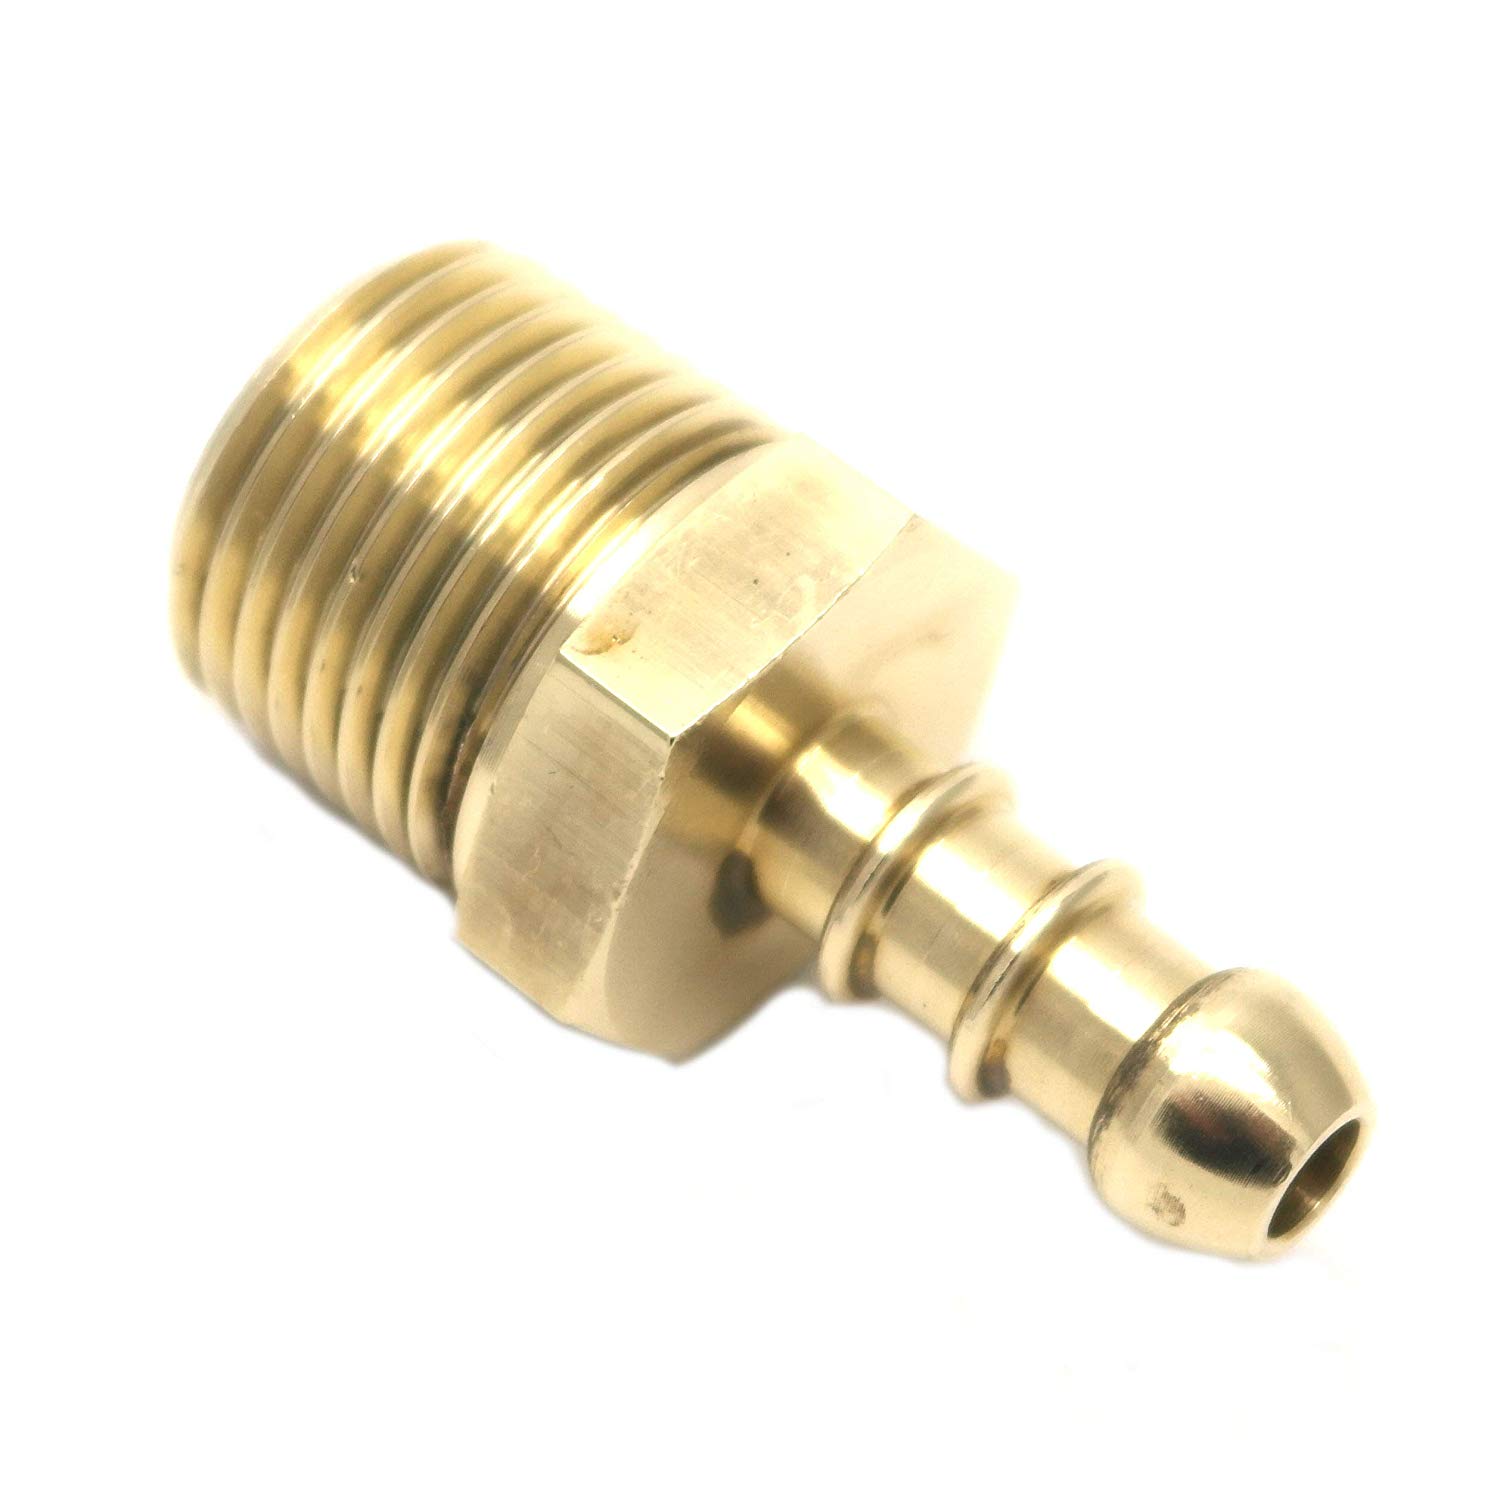 British Made 10mm COMPRESSION FITTING TO LPG FULHAM NOZZLE TO 8mm I/D HOSE 